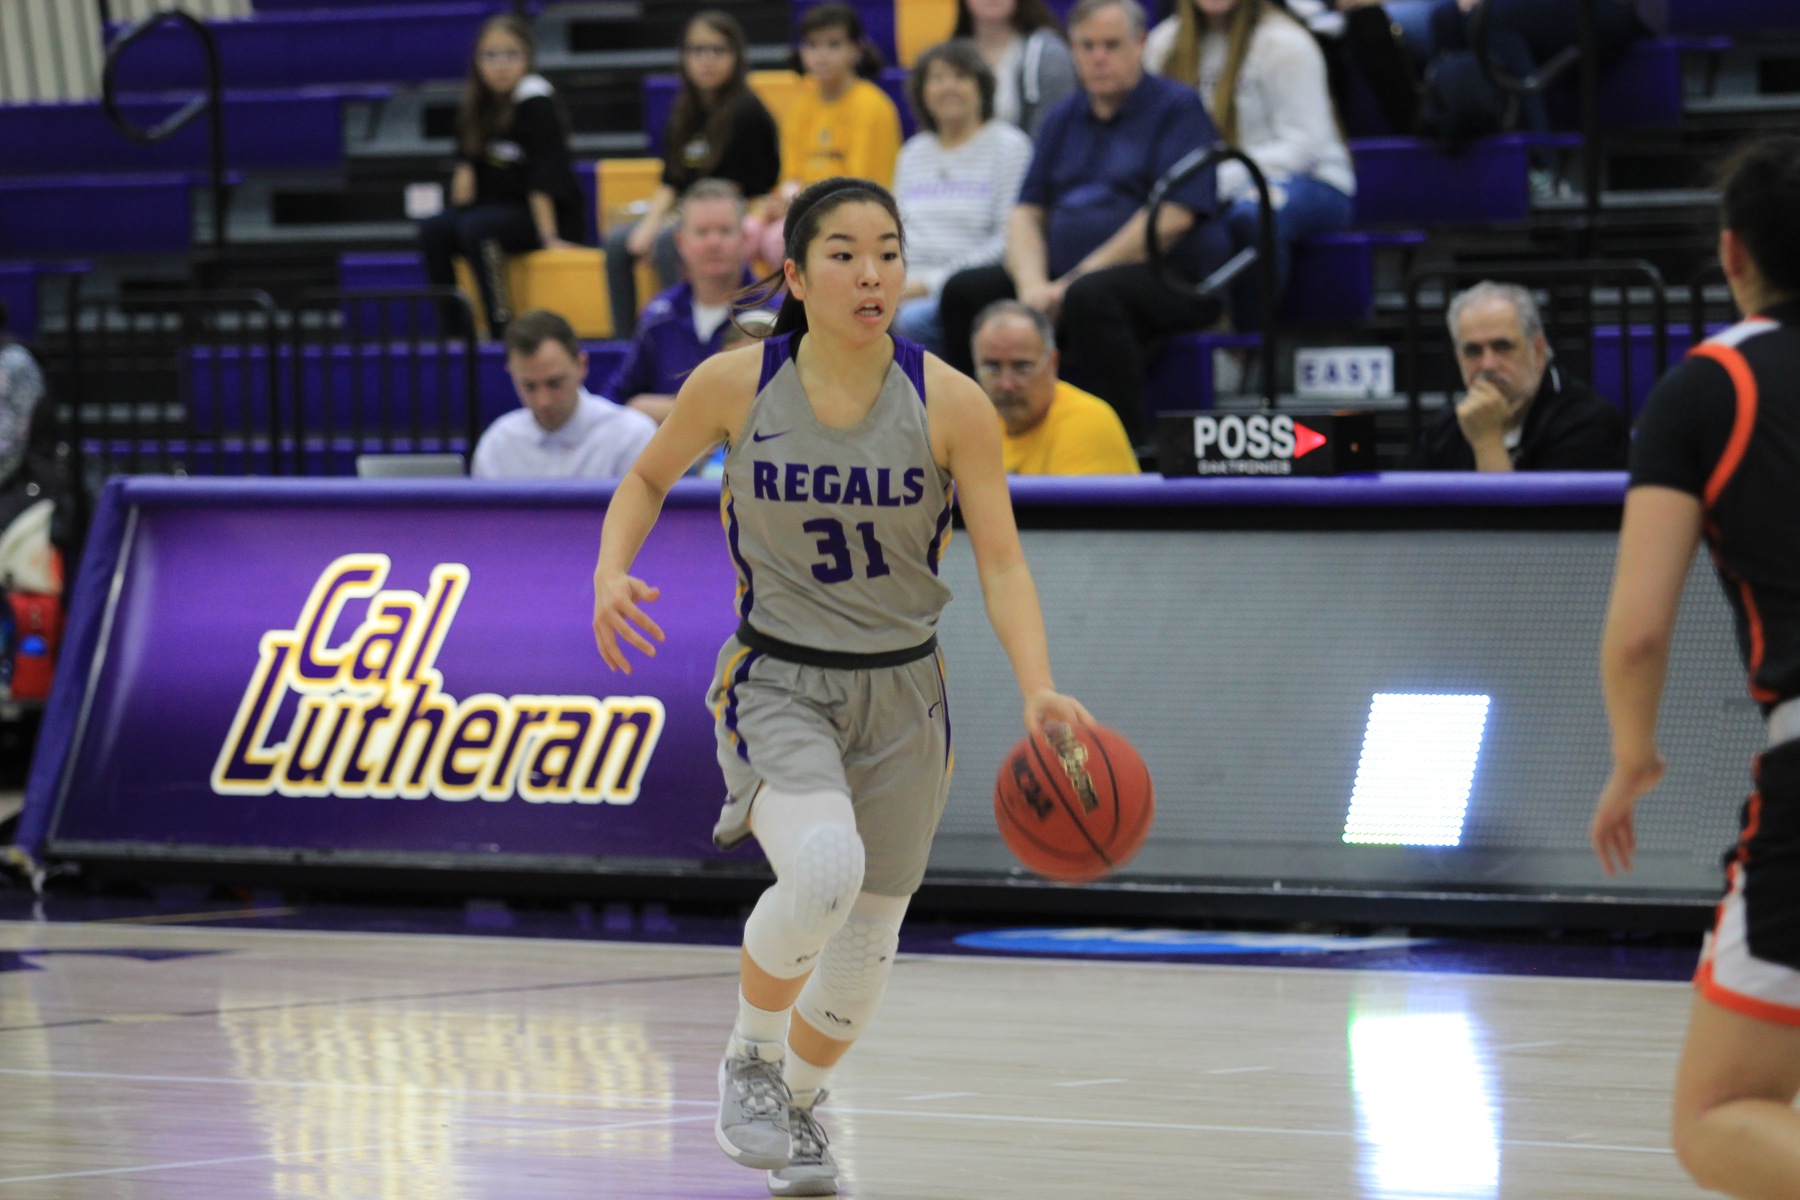 Mackenzy Iwahashi was excellent on both ends of the floor, scoring 14 points while grabbing nine rebounds and tallying thee steals. (Photo Credit: Gabby Flores)